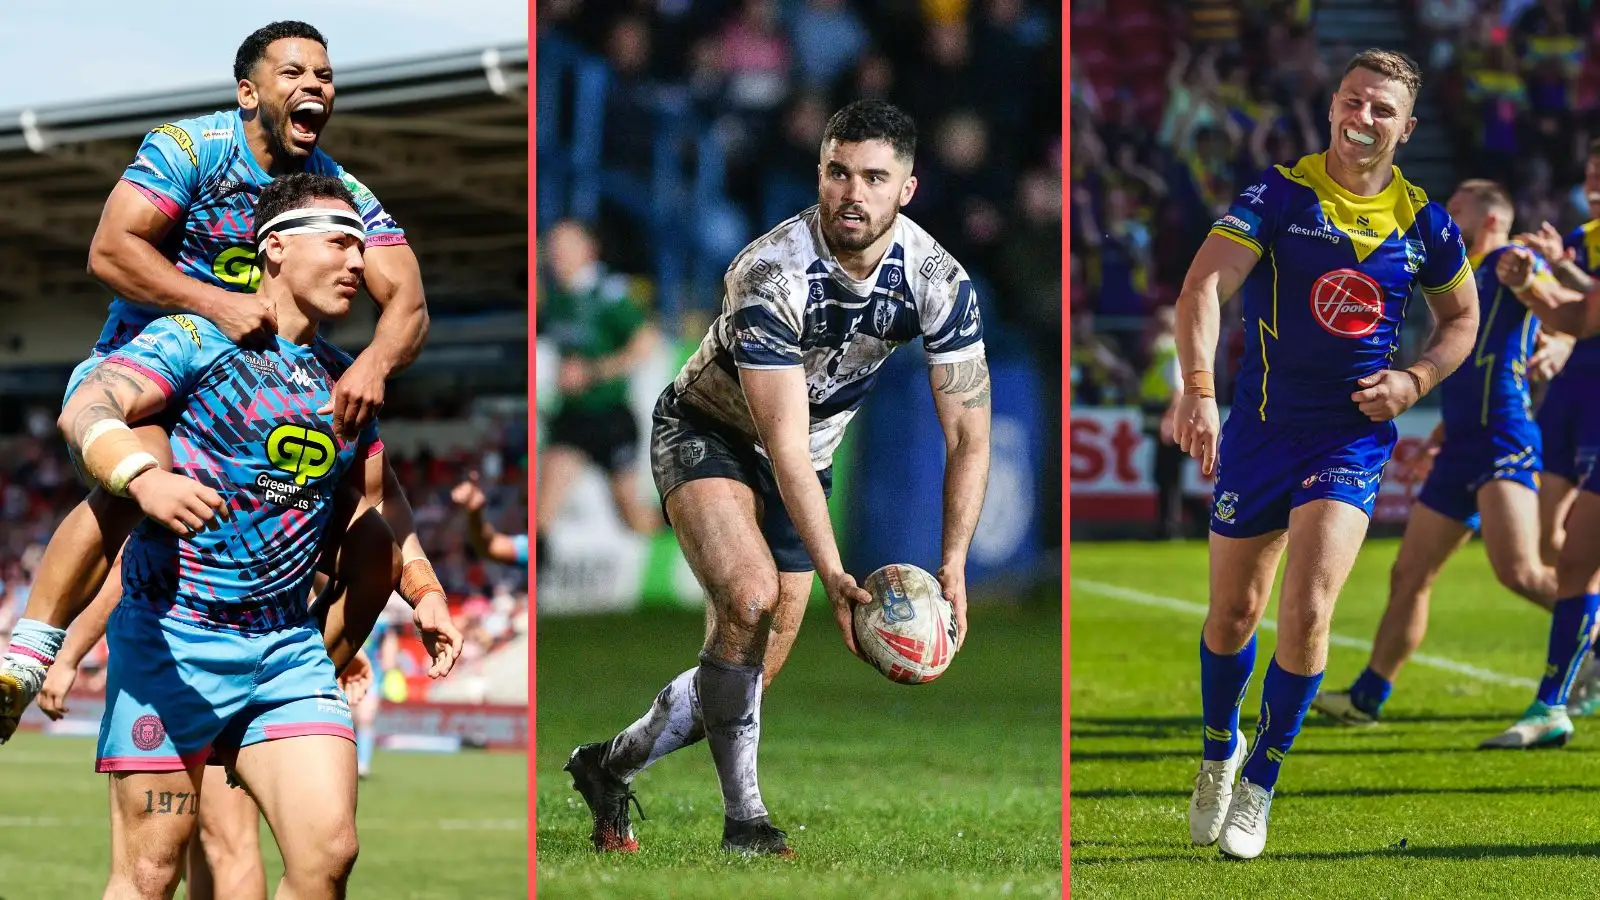 Power Rankings: Wembley-bound Wigan Warriors & Warrington Wolves rise, 5 Championship clubs included